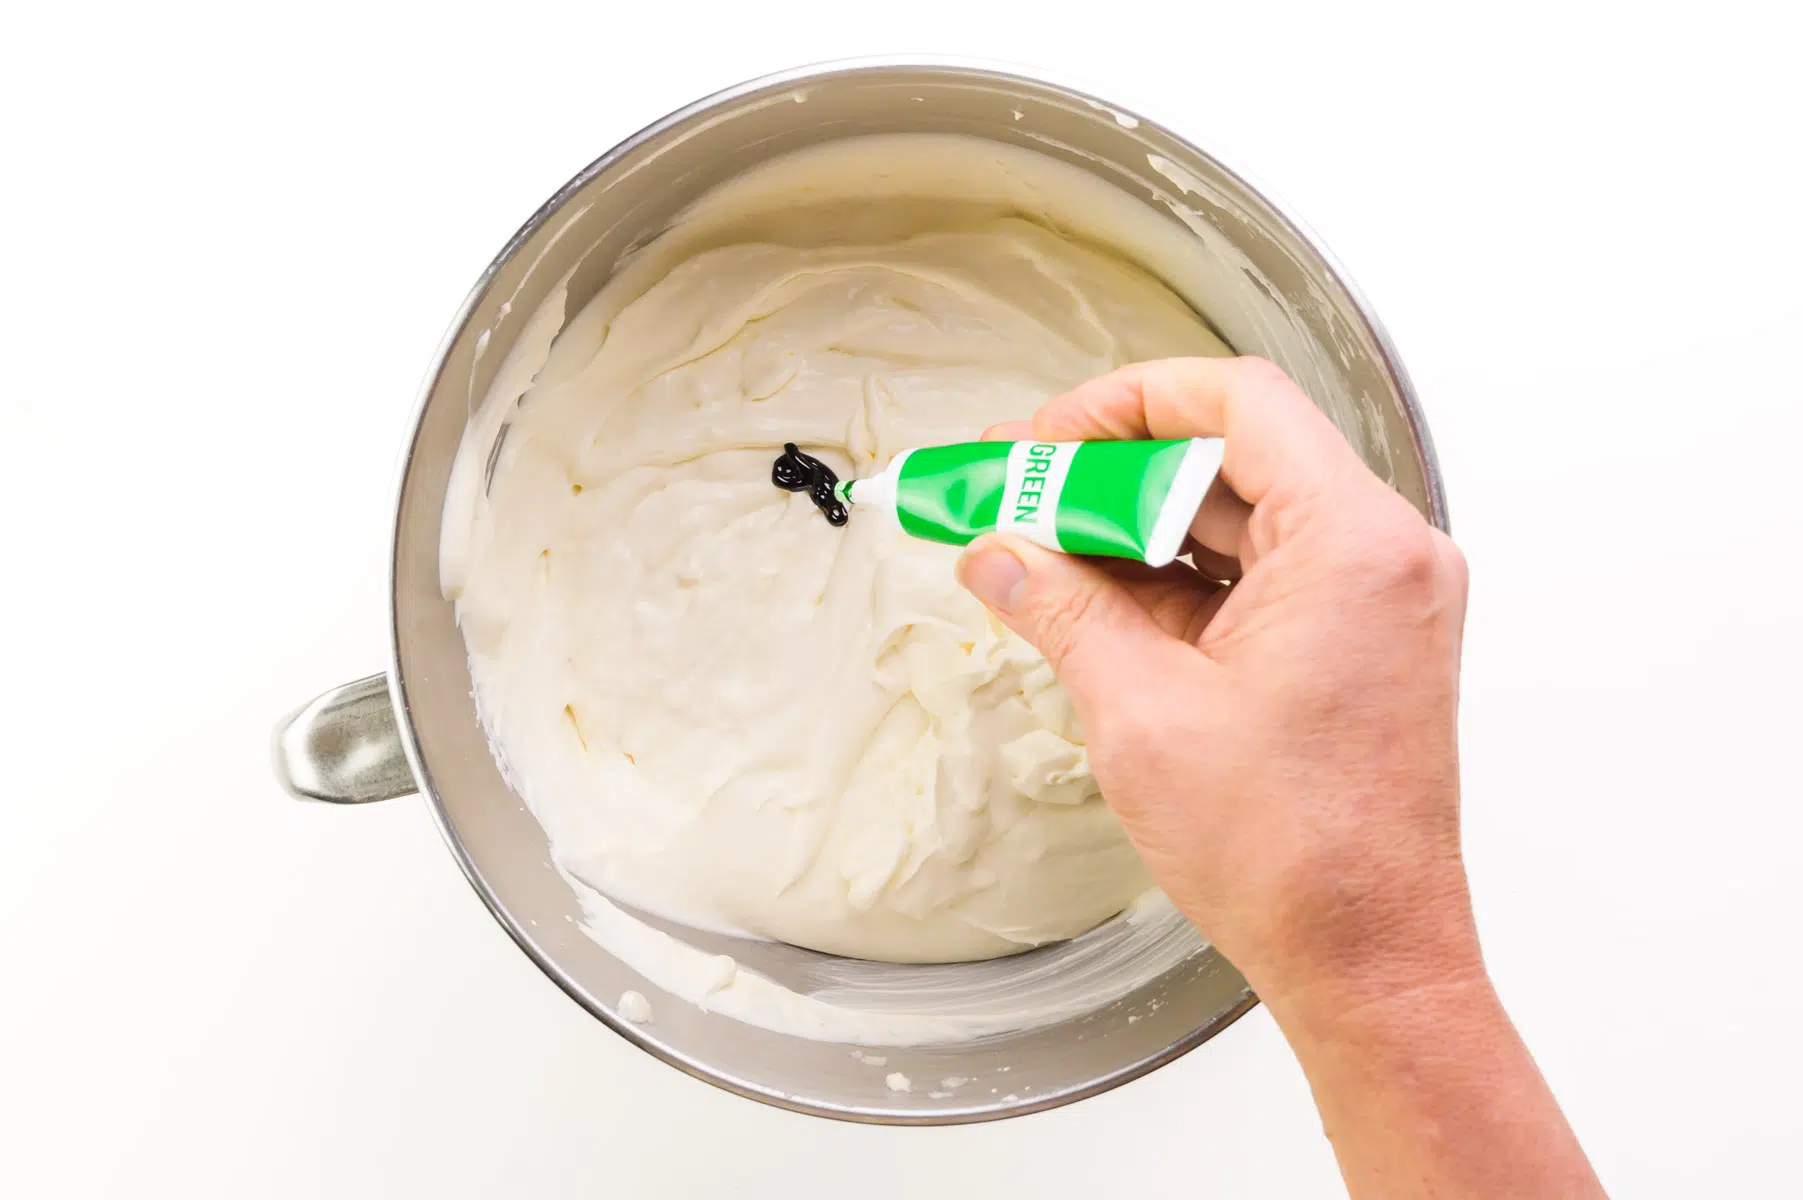 A hand holds a tube of green food coloring, adding drops to a bowl of whipped cream.